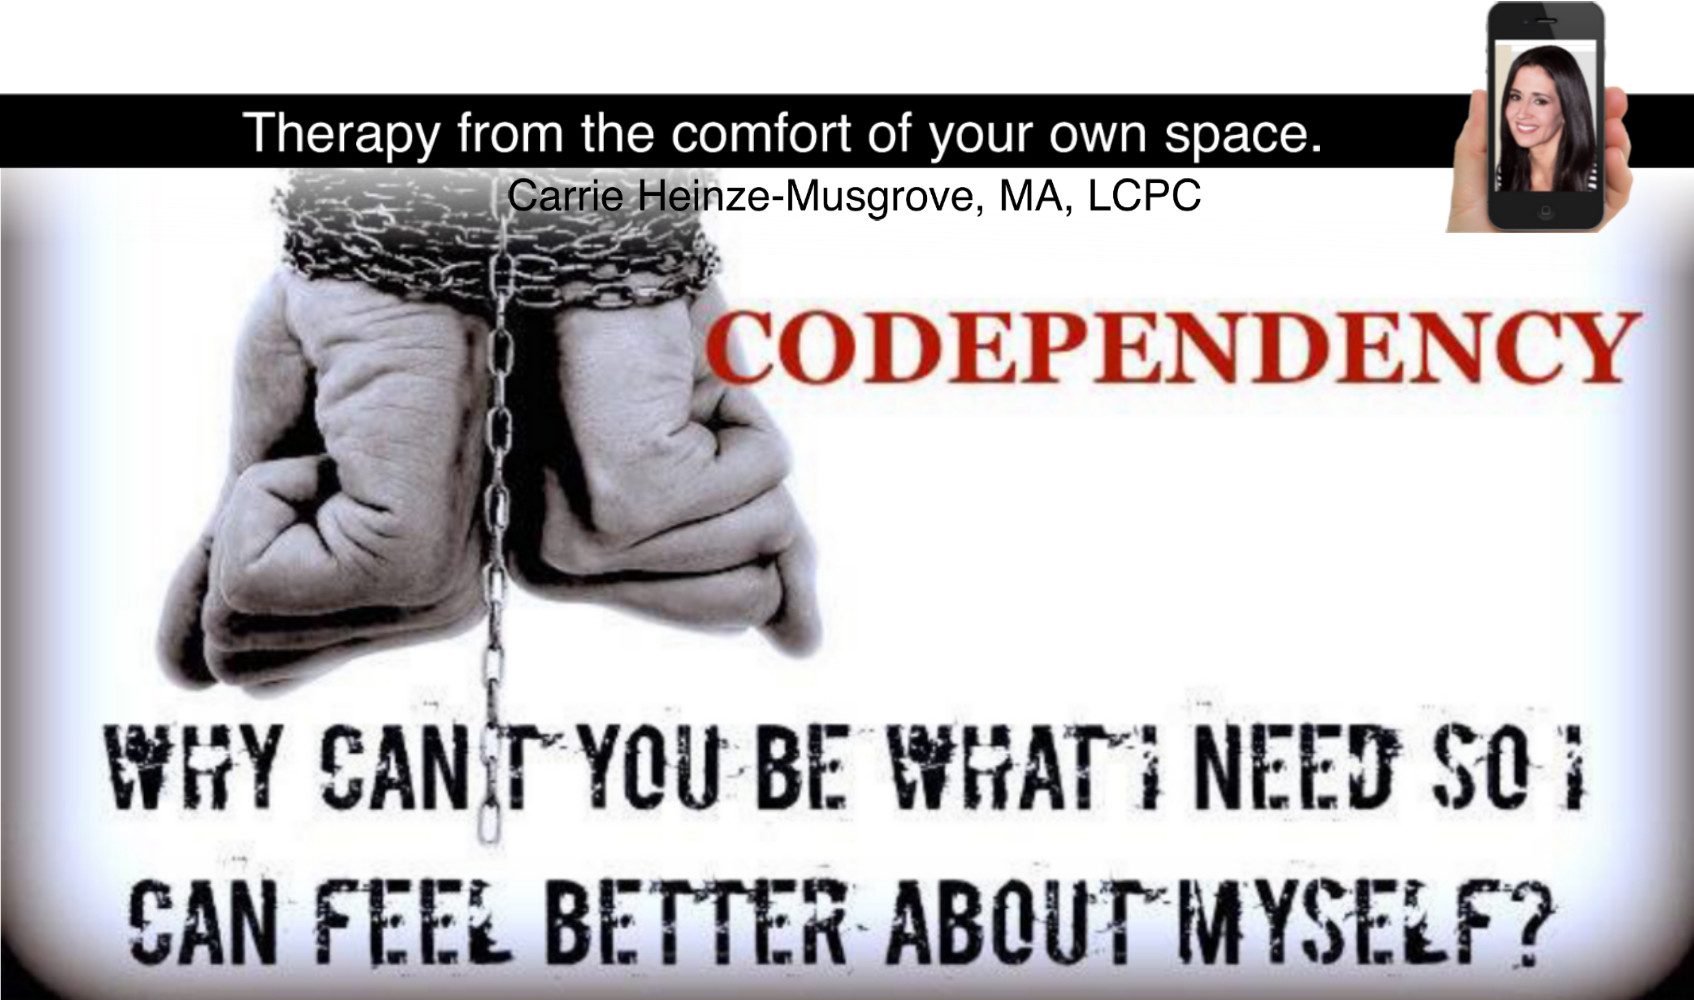 Are you in a codependent relationship?